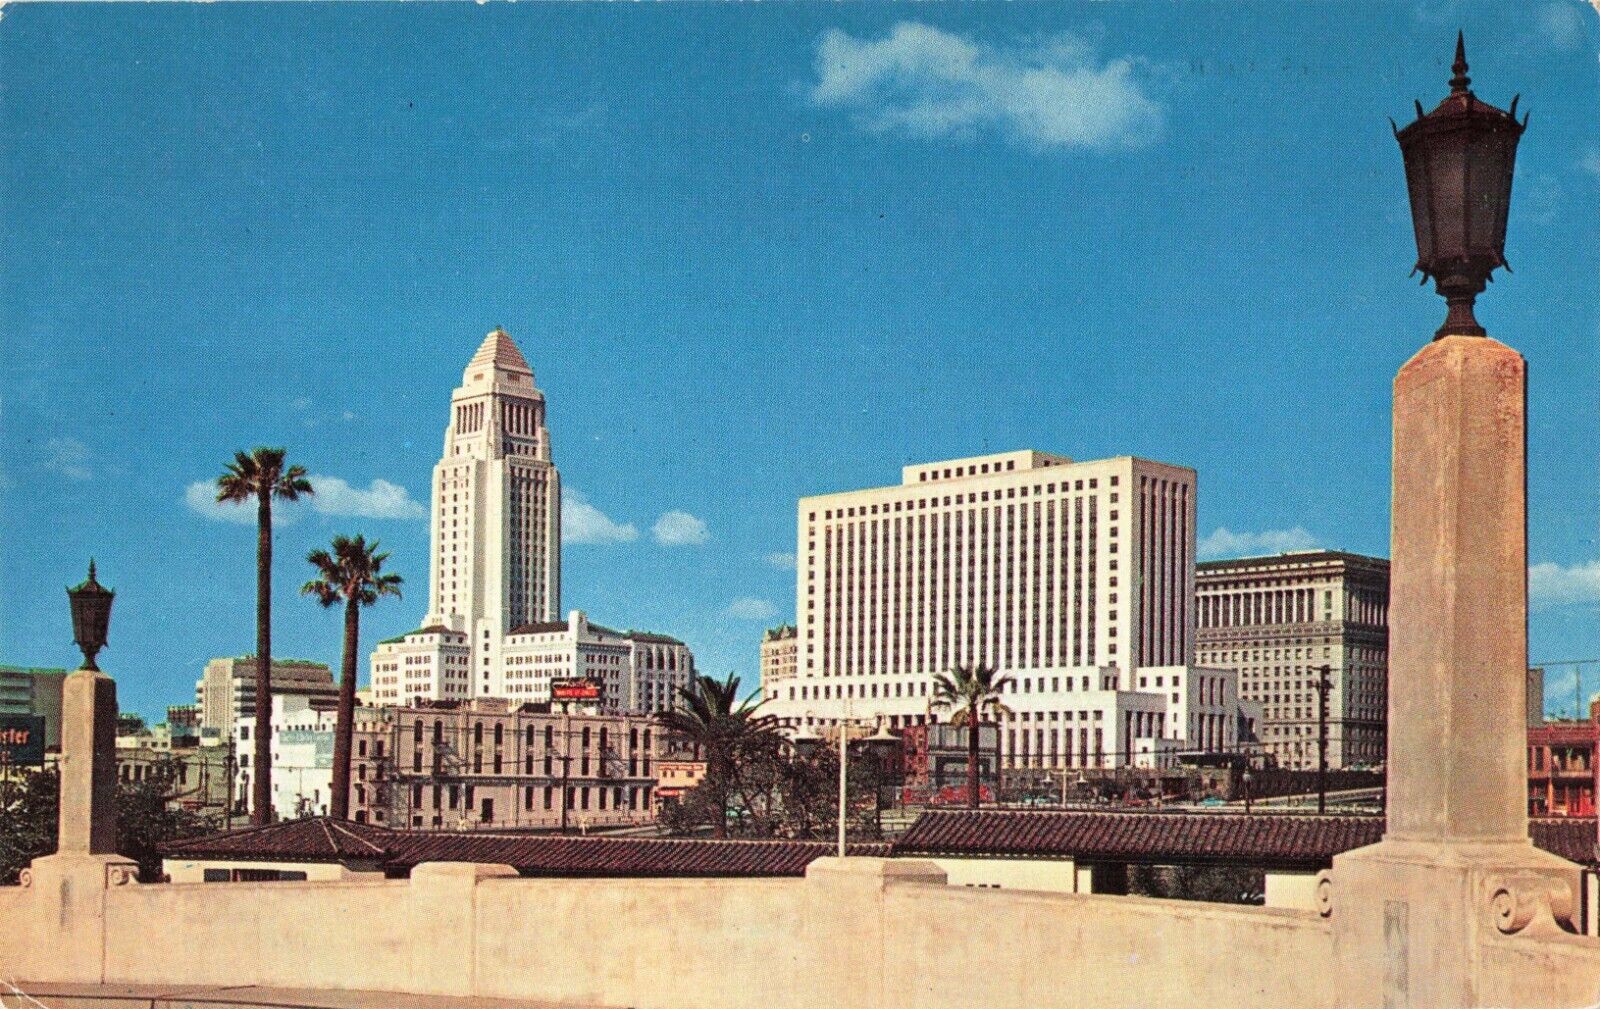 Los Angeles CA, Civic Center Skyline from Union Station, Vintage Postcard